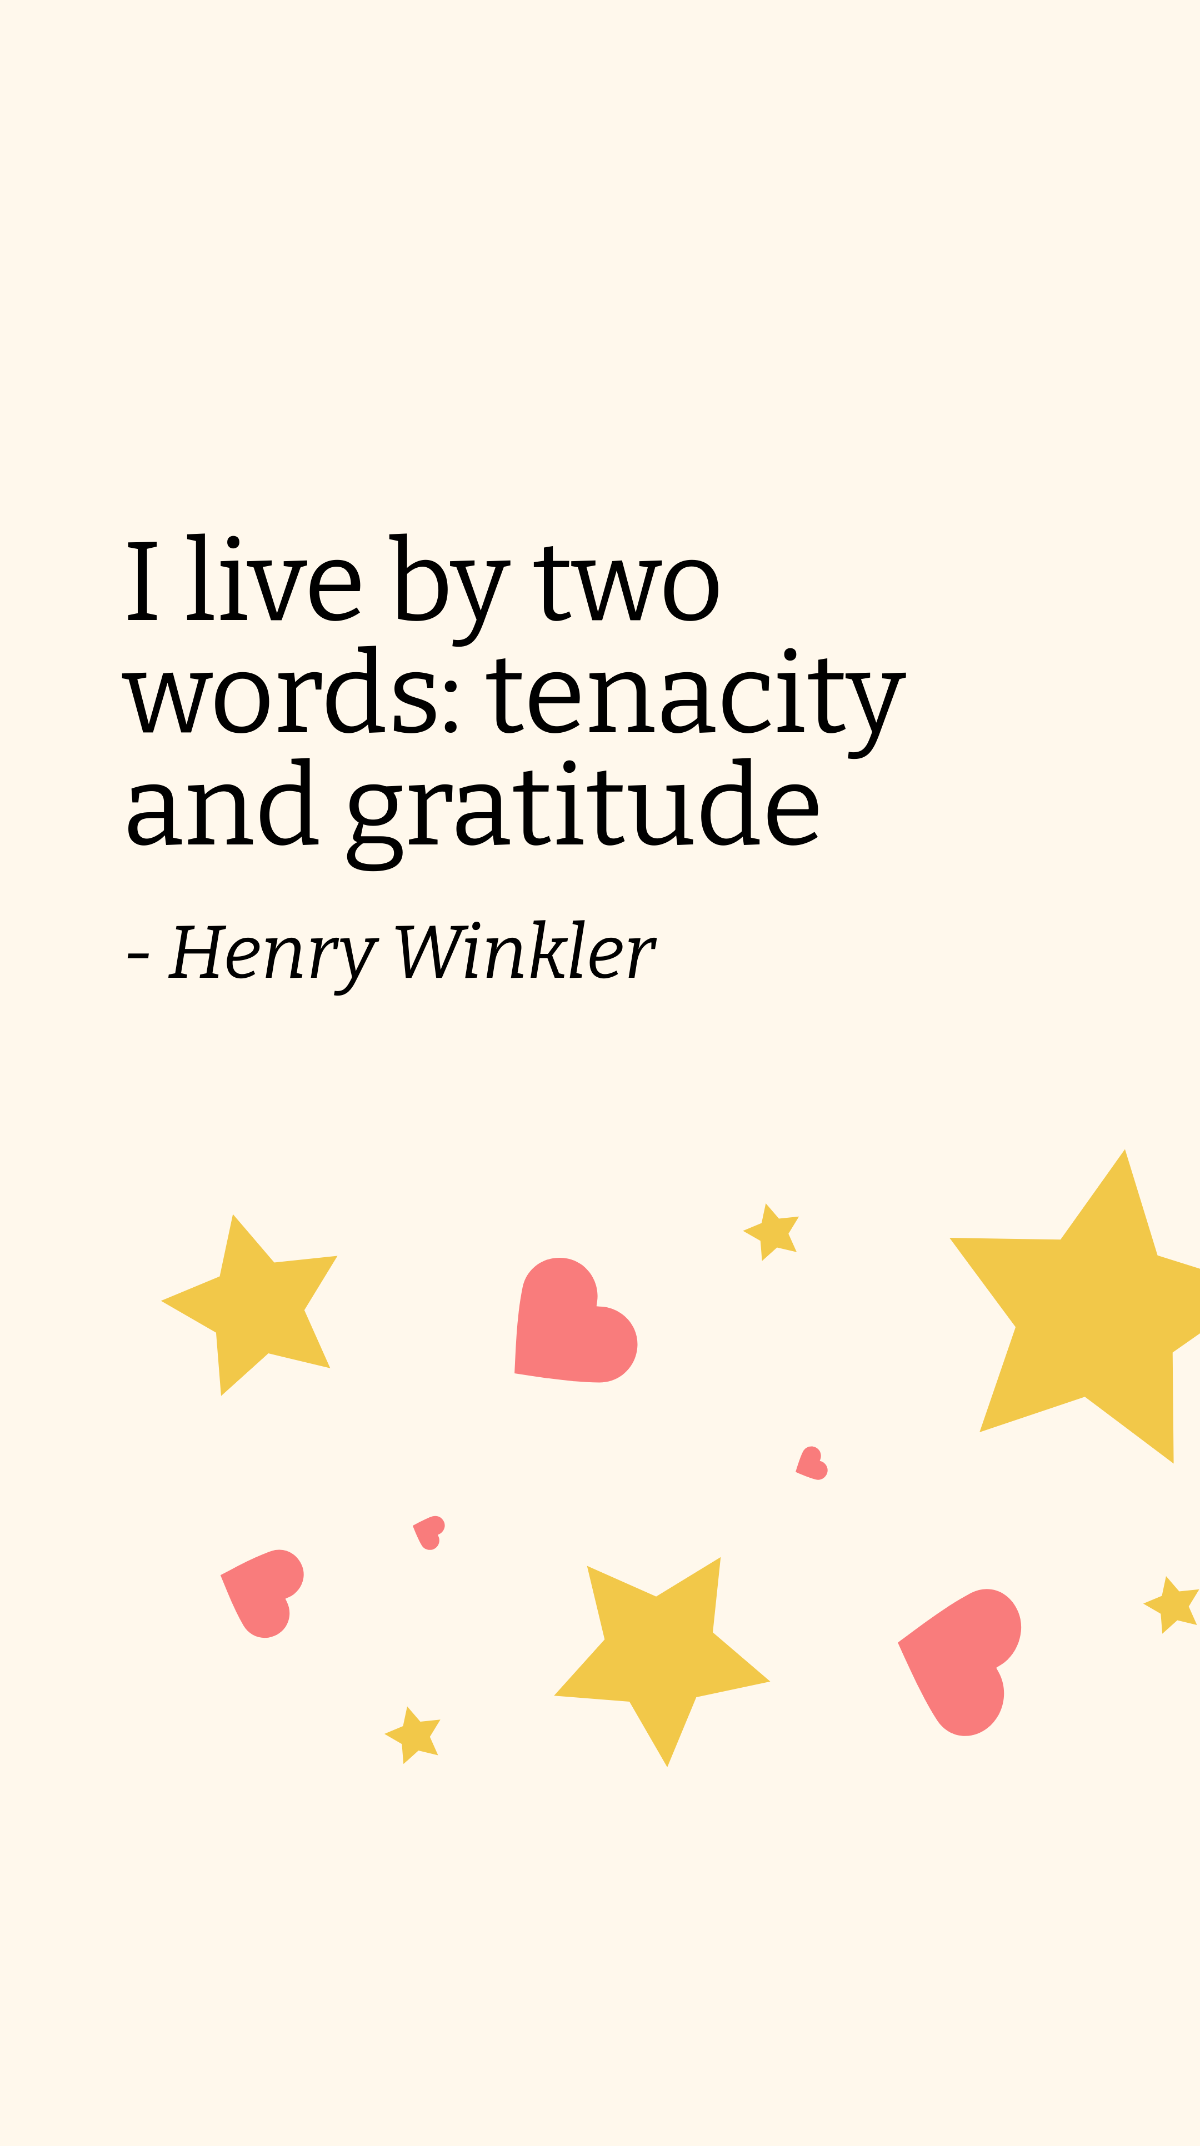 Henry Winkler - I live by two words: tenacity and gratitude Template